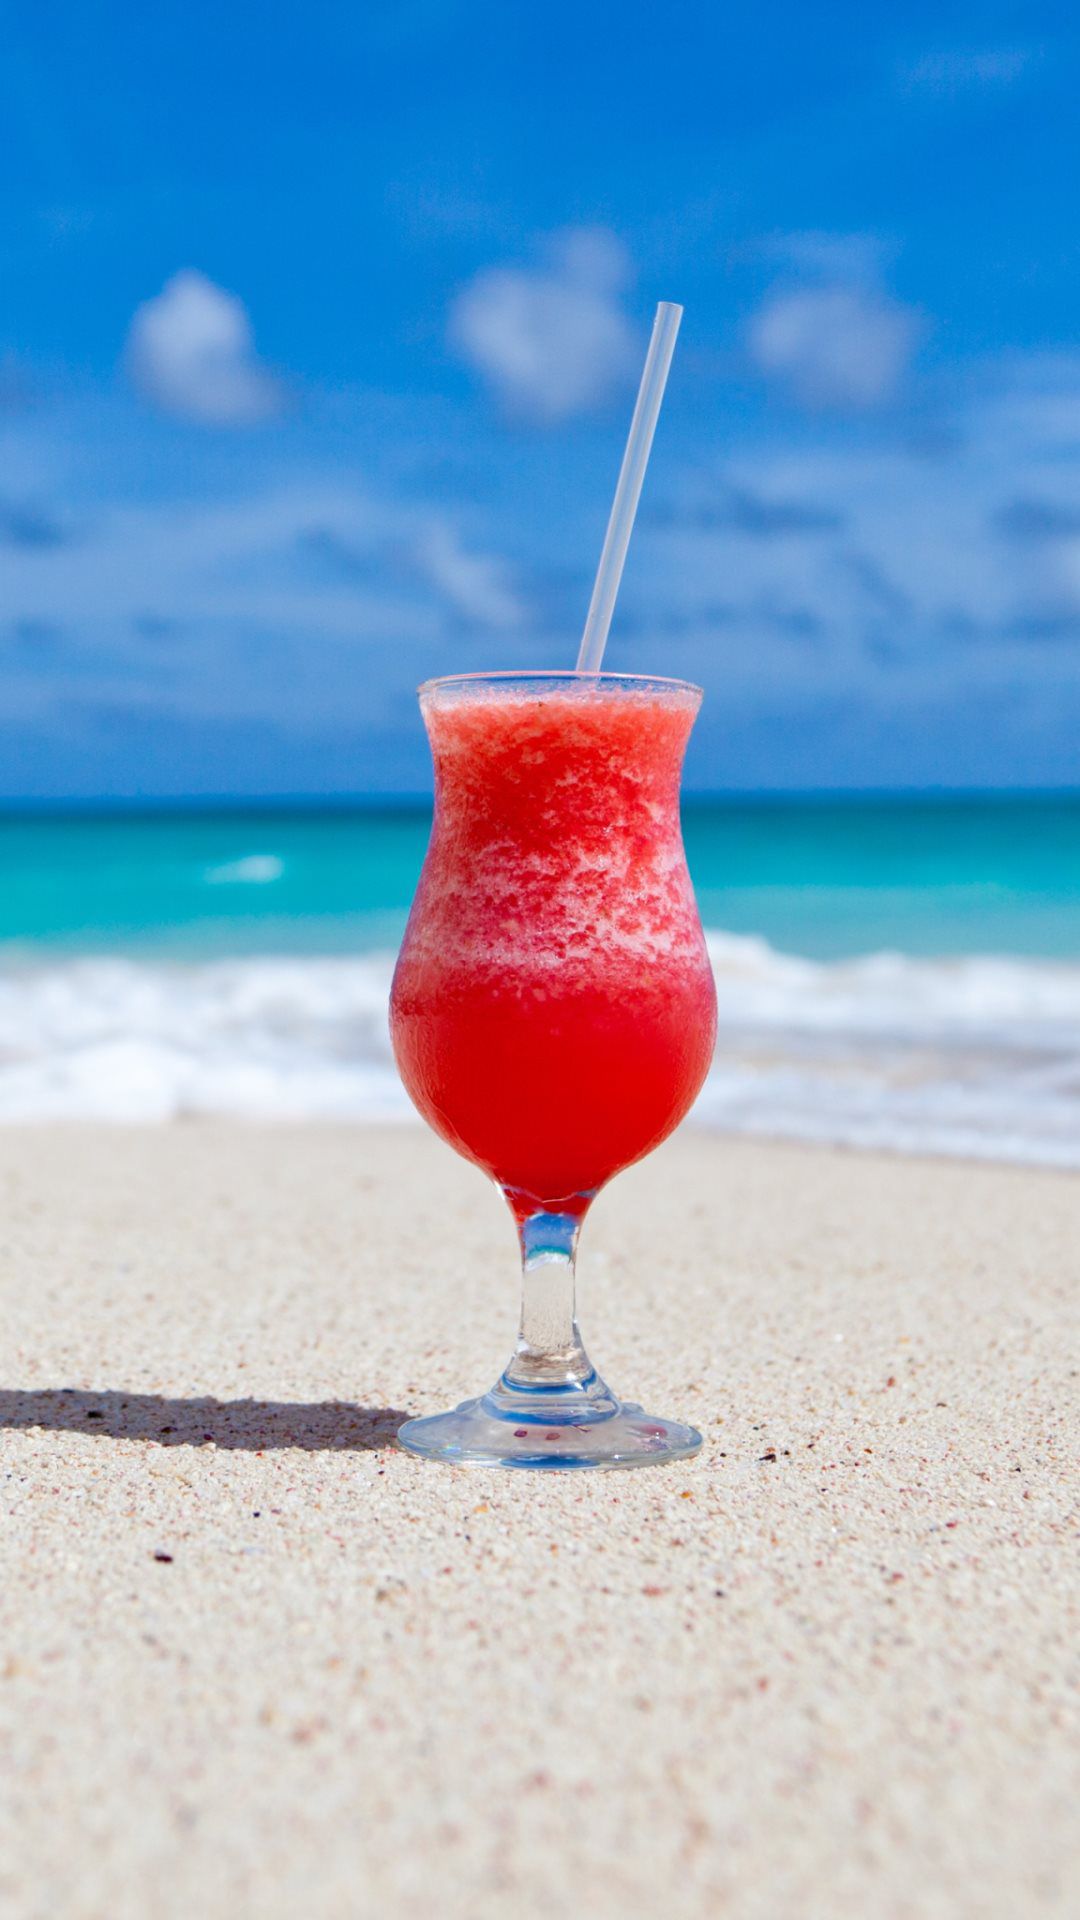 Exotic Cocktail Caribbean Beach Android Wallpapers free download